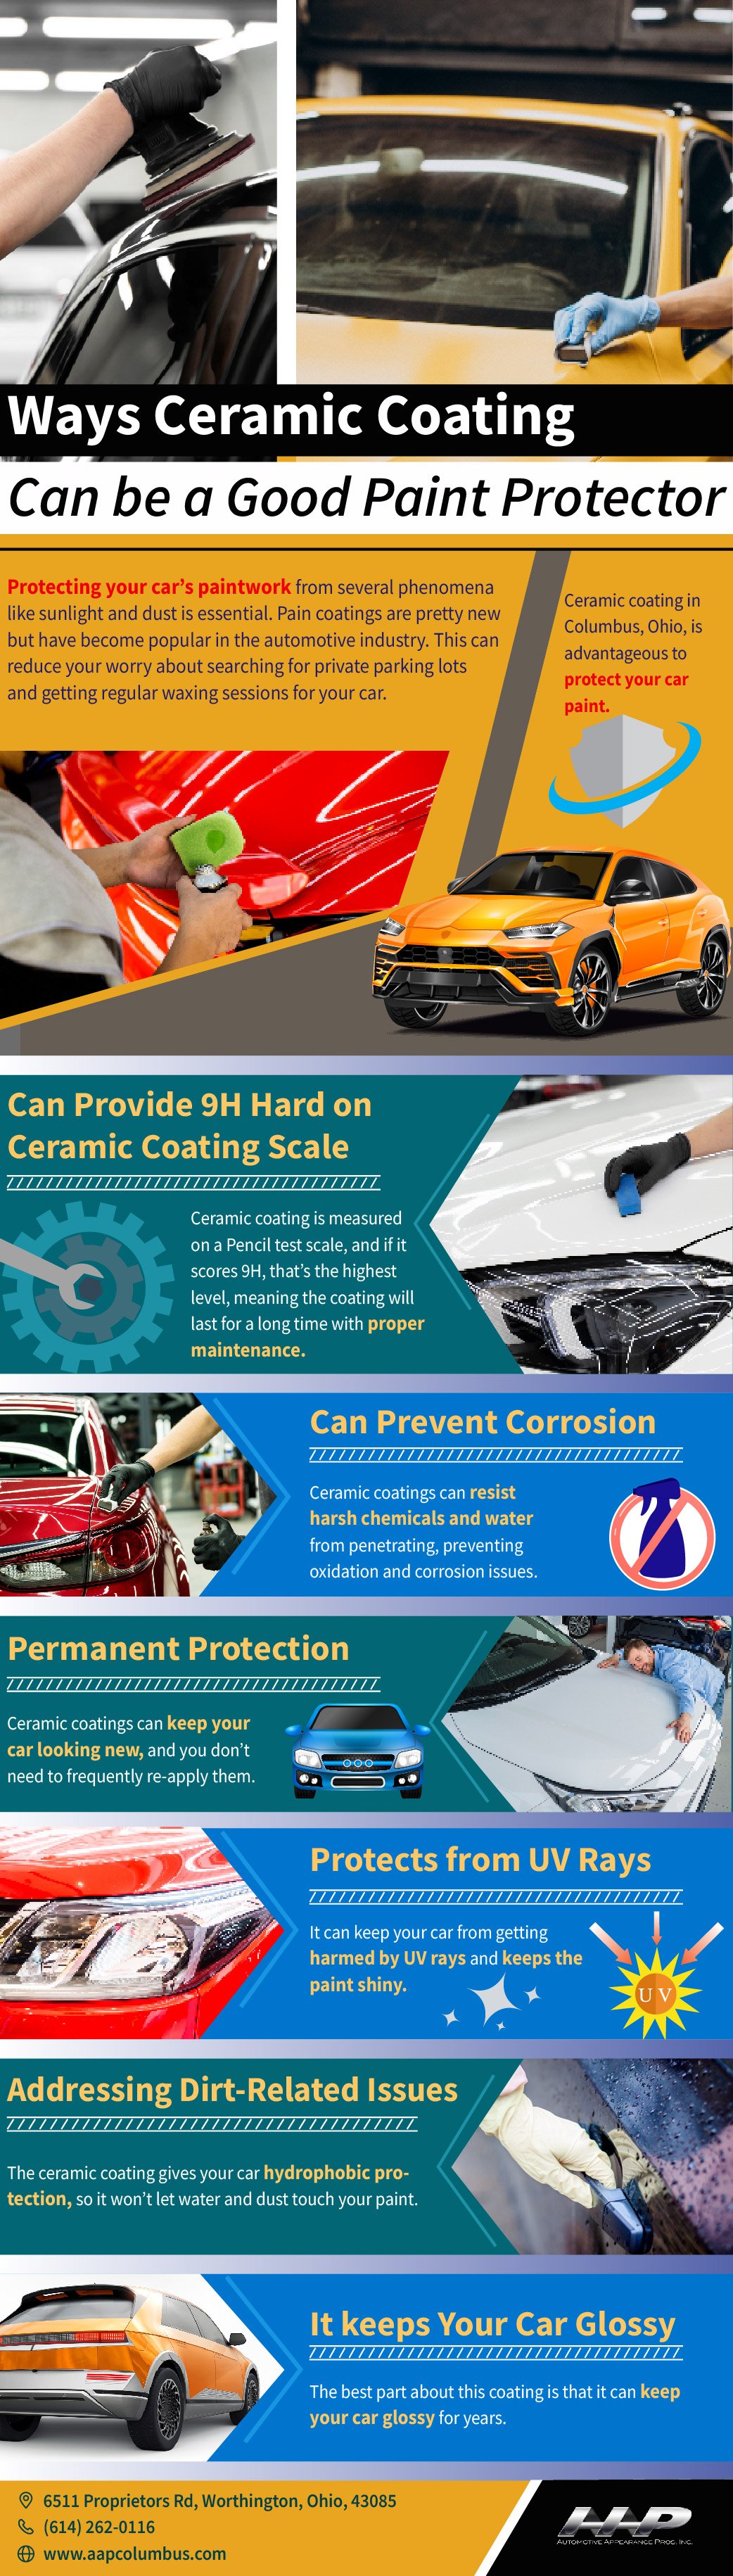 FASTEST WAY TO PROTECT YOUR CAR, Easy ceramic protection